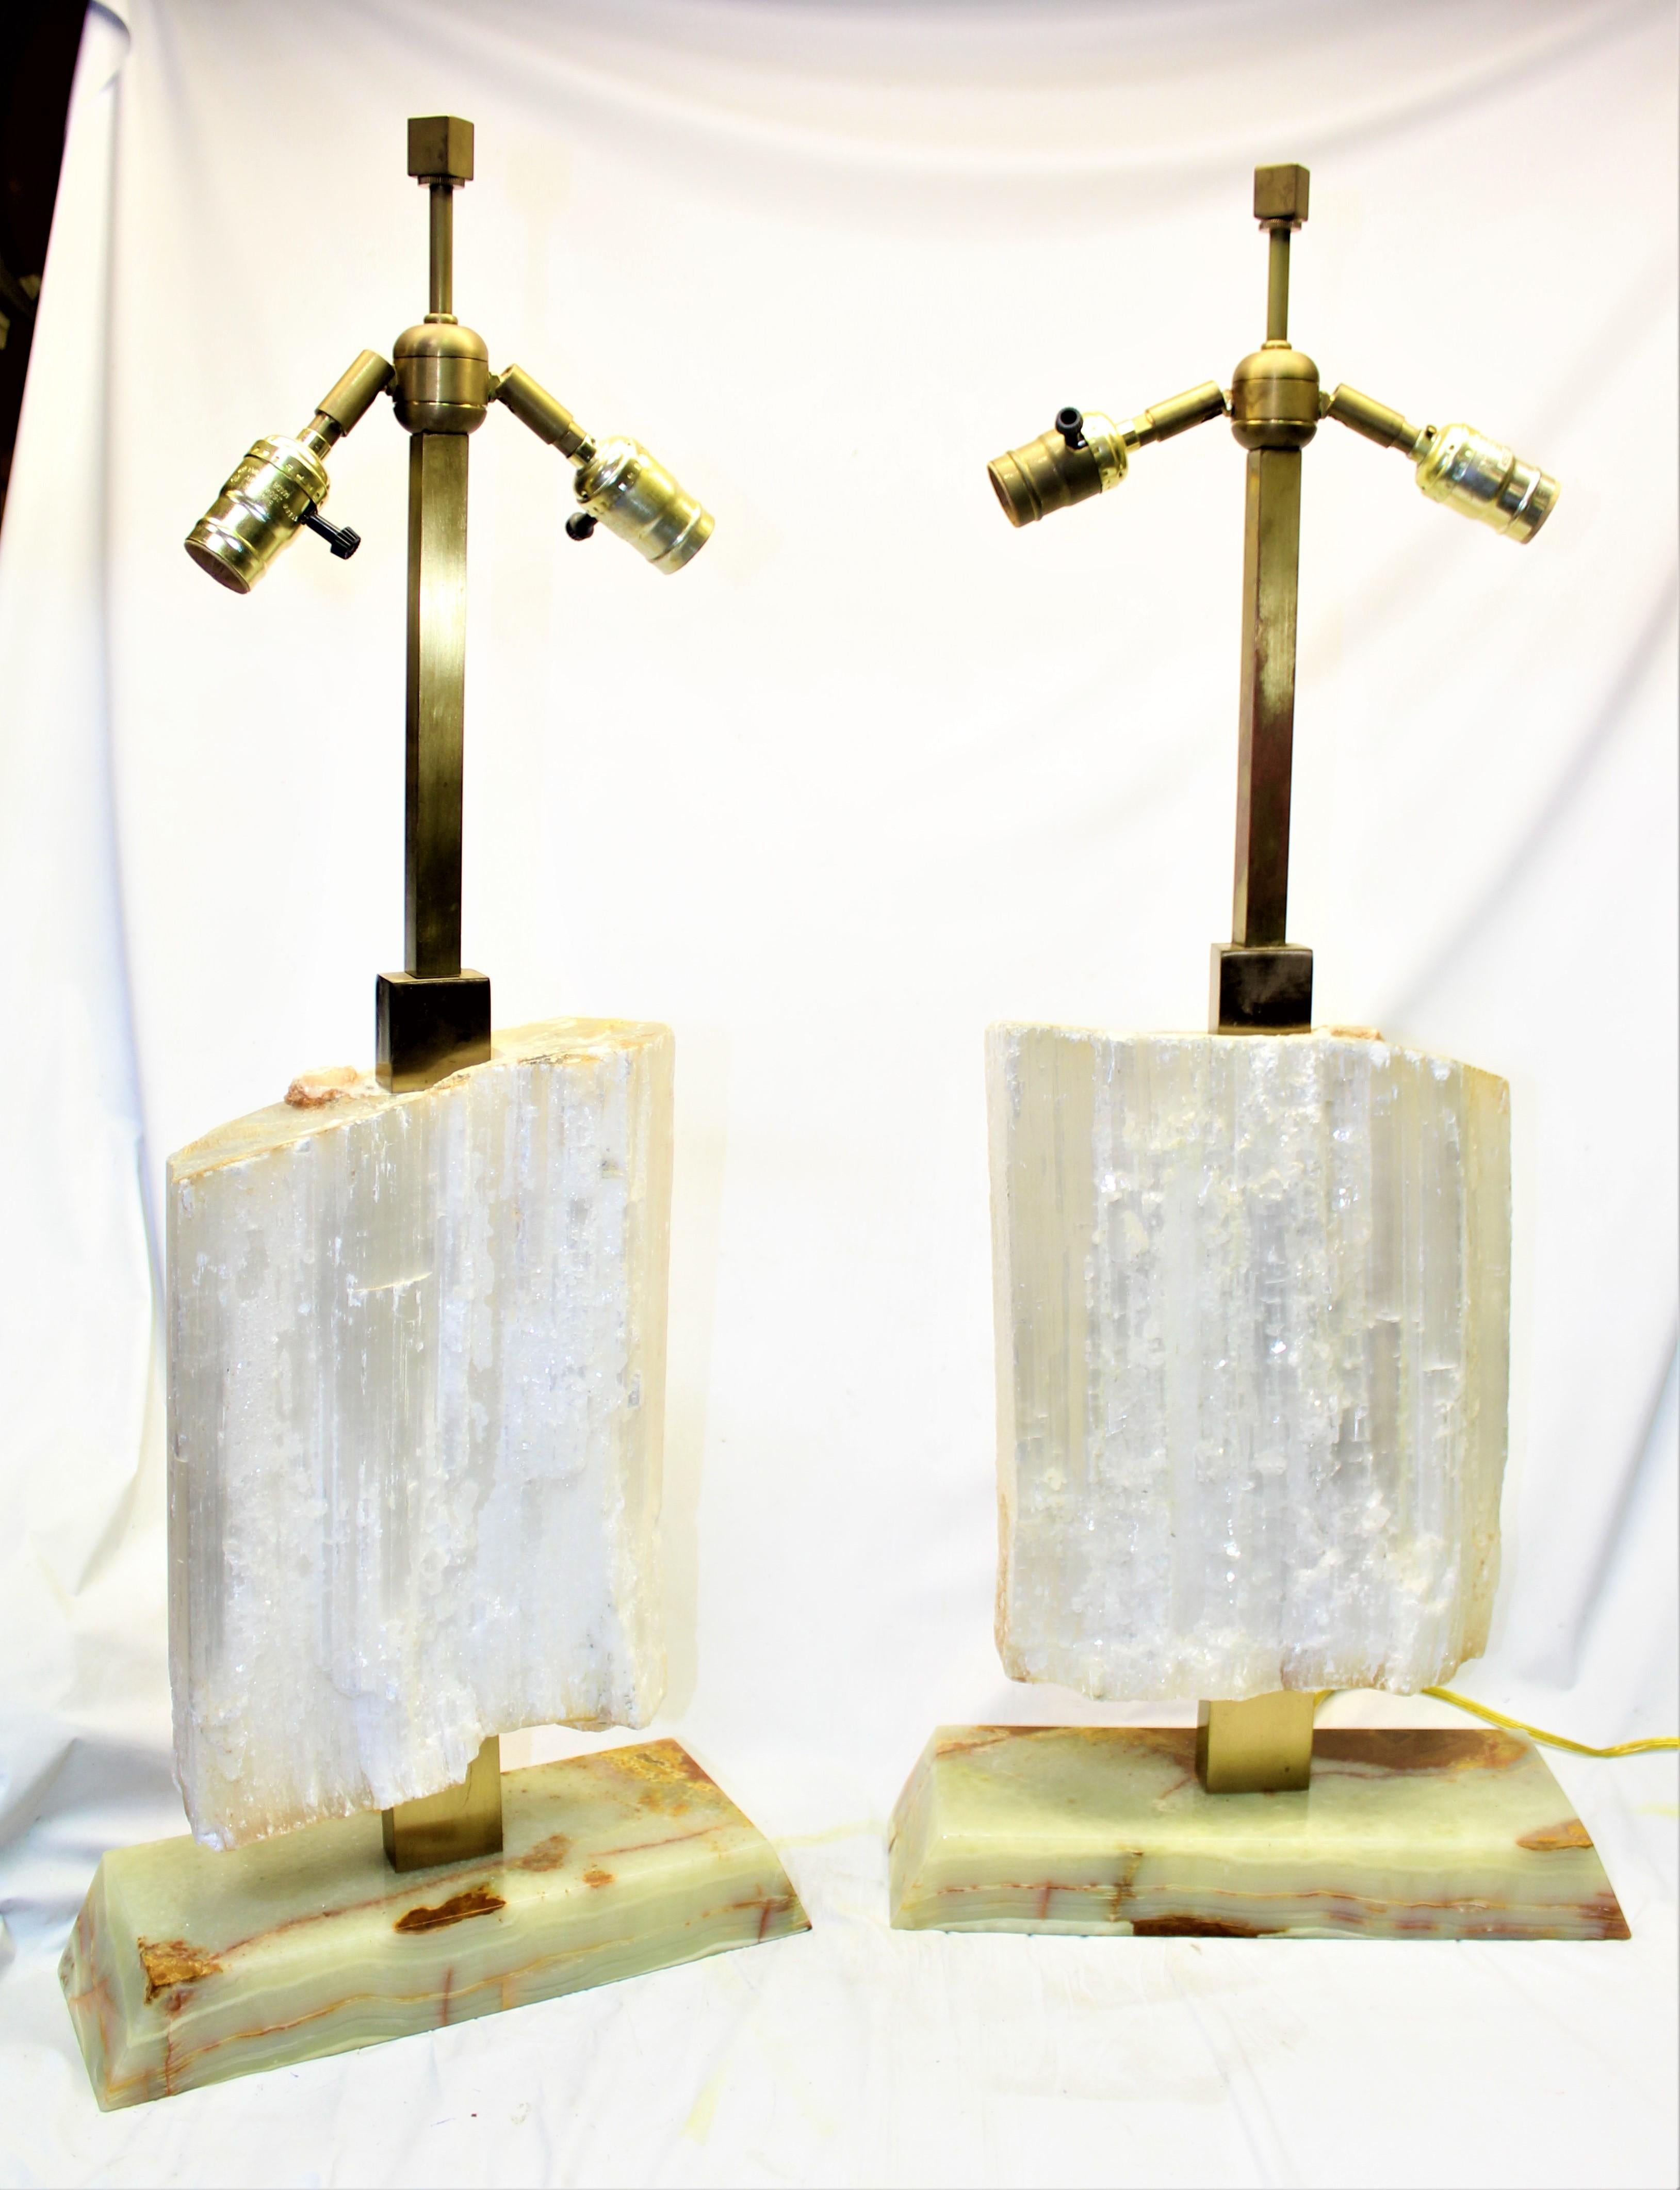 A large pair of natural selenite blocks made into lamps metal frames of solid brass hardware and with double sockets Drilled and mounted on green onyx bases. Custom made one of a kind. Will need white glove packing and shipping to protect them in